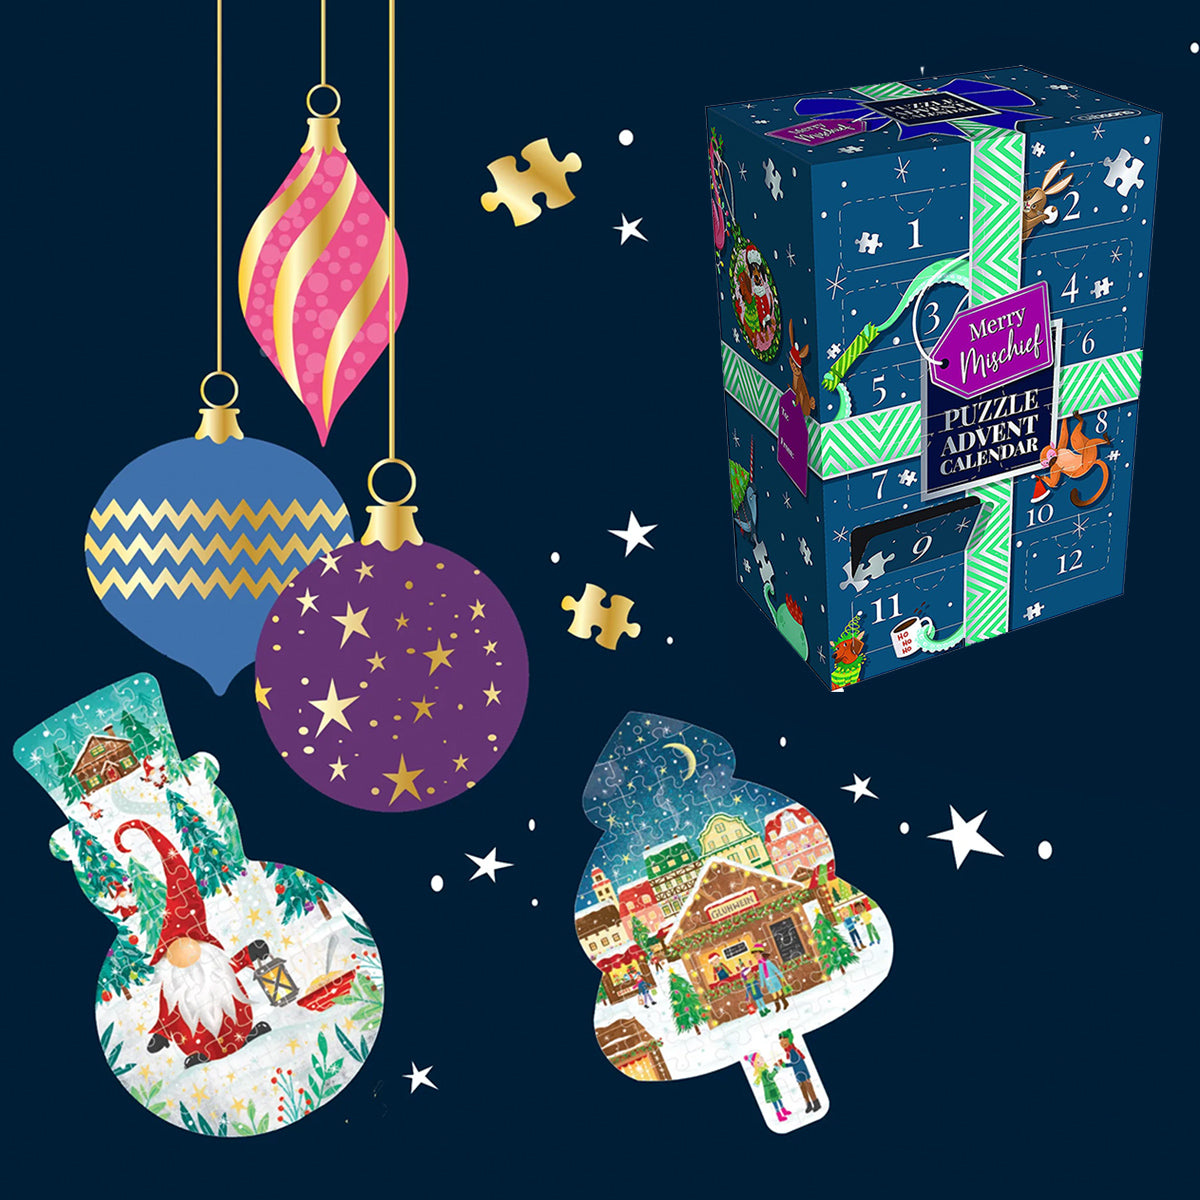 Illustrated by Jess Bretherton, our new advent calendar is bound to spread Christmas cheer with its striking blue box and gold foiling.